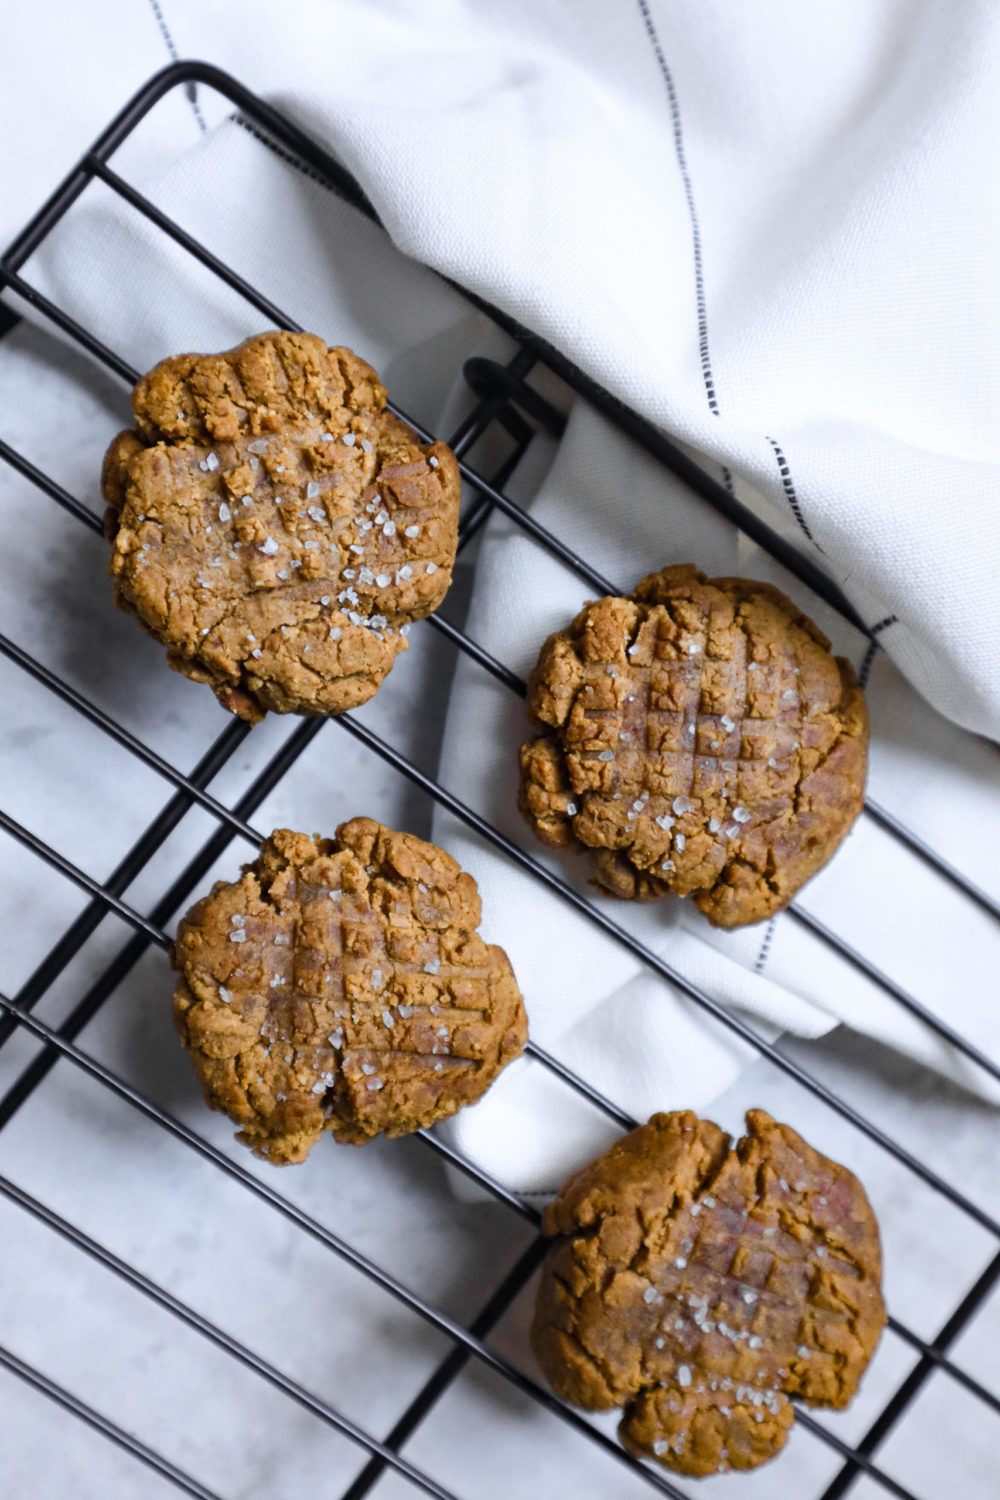 vegan peanut butter cookies on a wire cooling rack. a white tea towel is visible above.